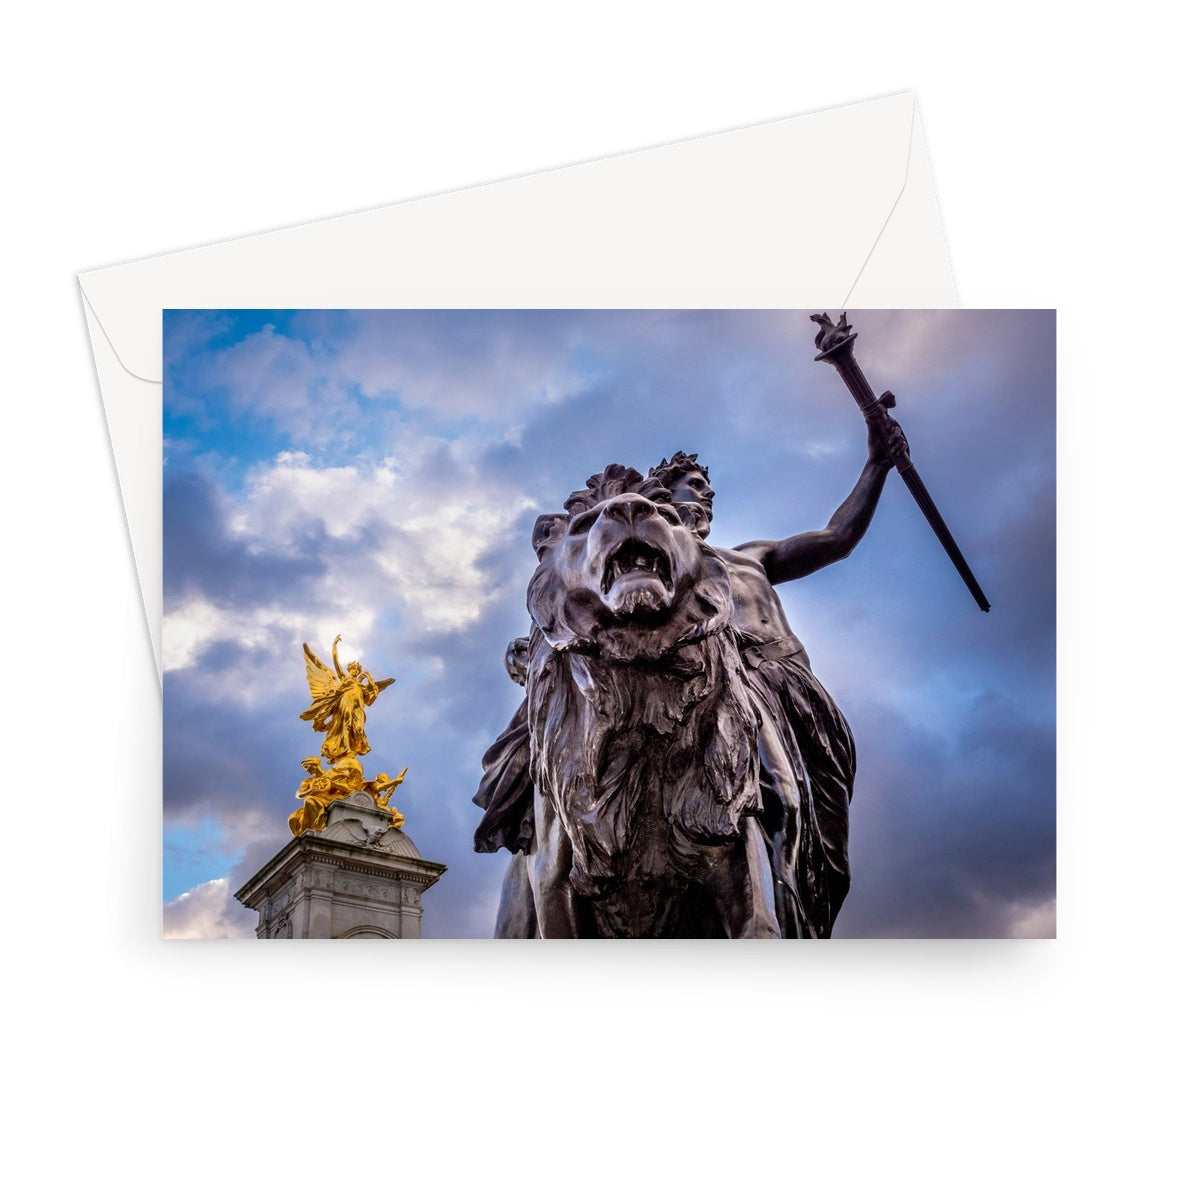 Gilded Winged Victory at the top of the Victoria Memorial and Progress bronze statue at base, London. Greeting Card